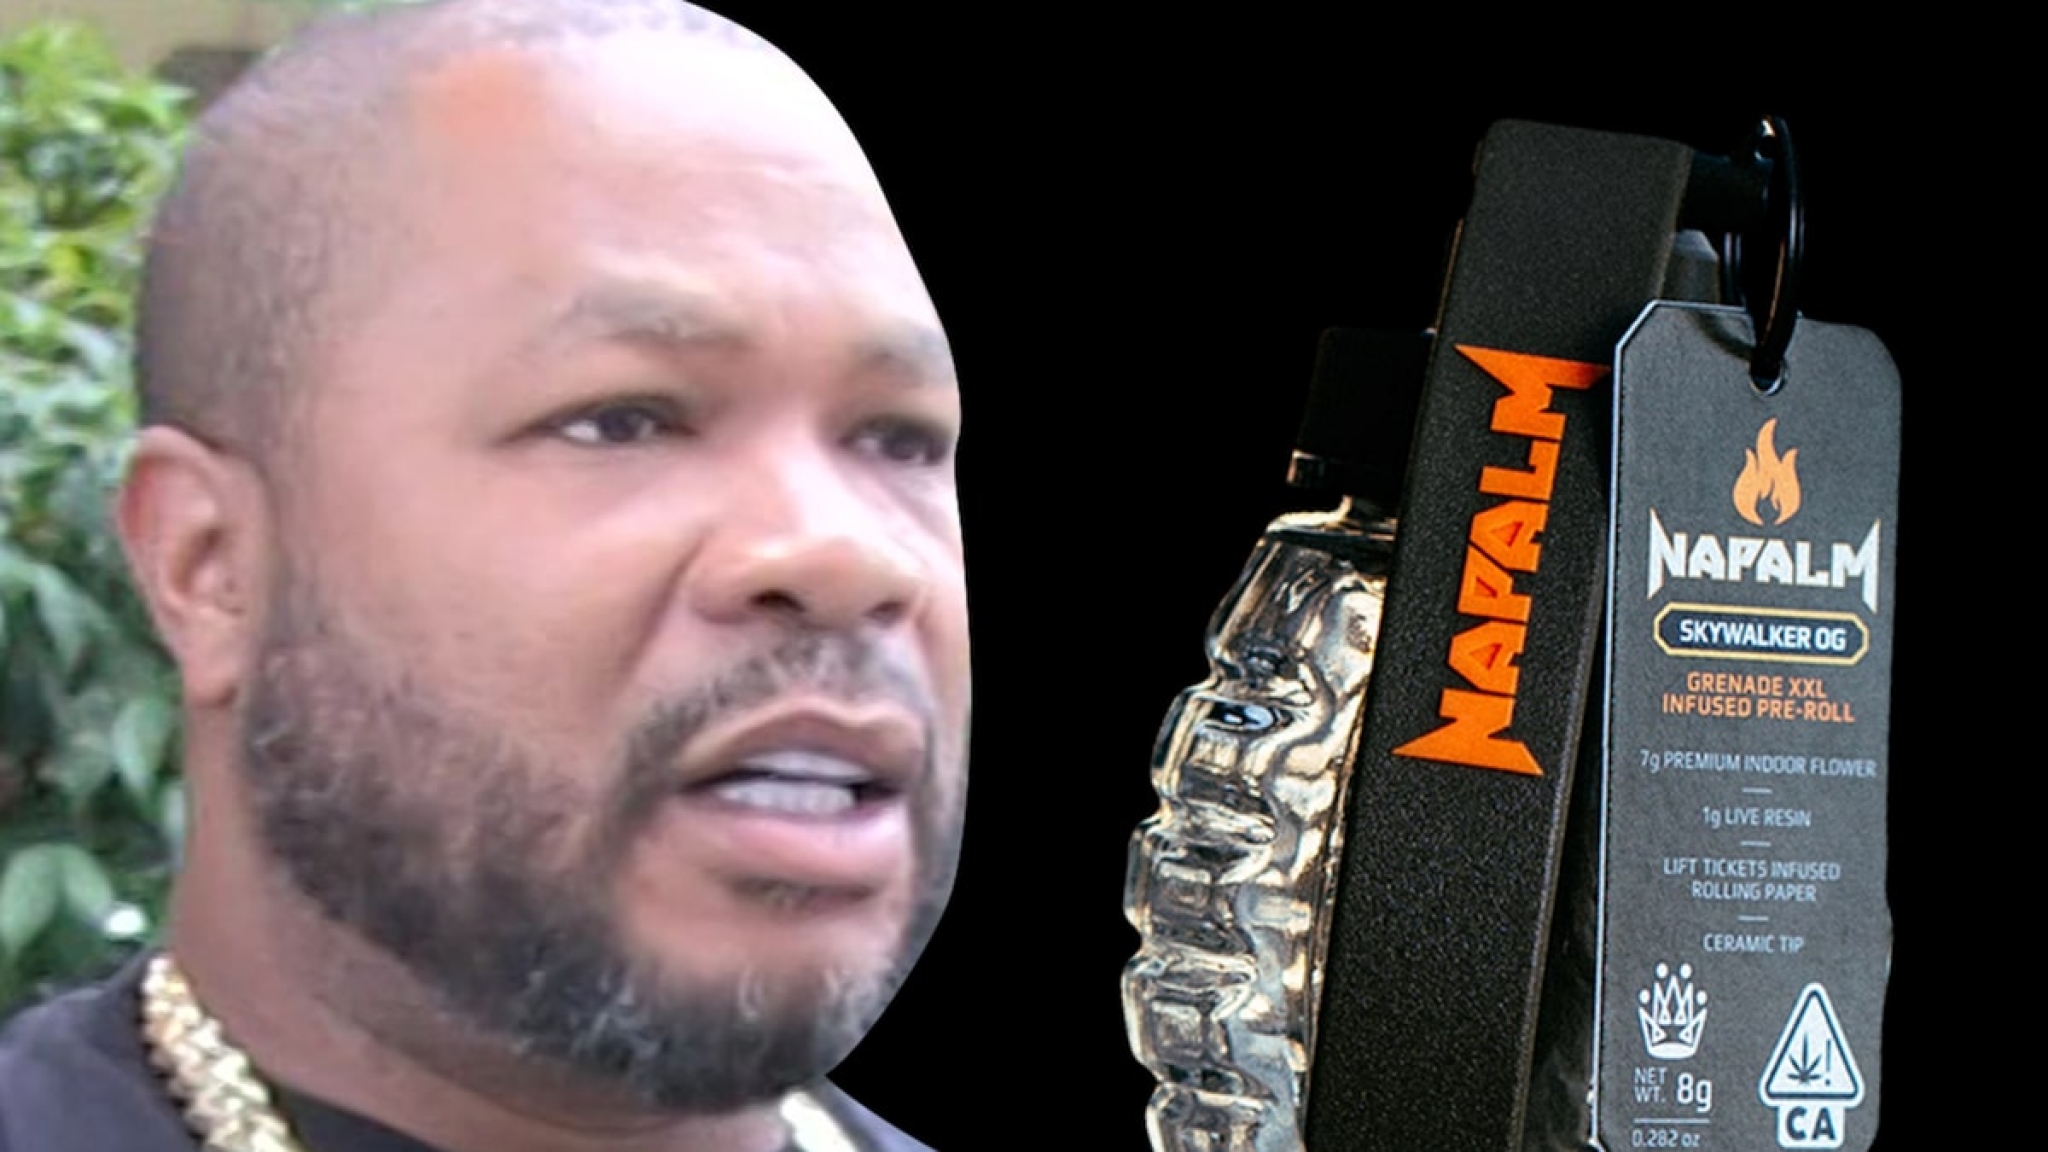 Xzibit’s ‘Napalm’ Weed Company Banned from L.A. Dispensary